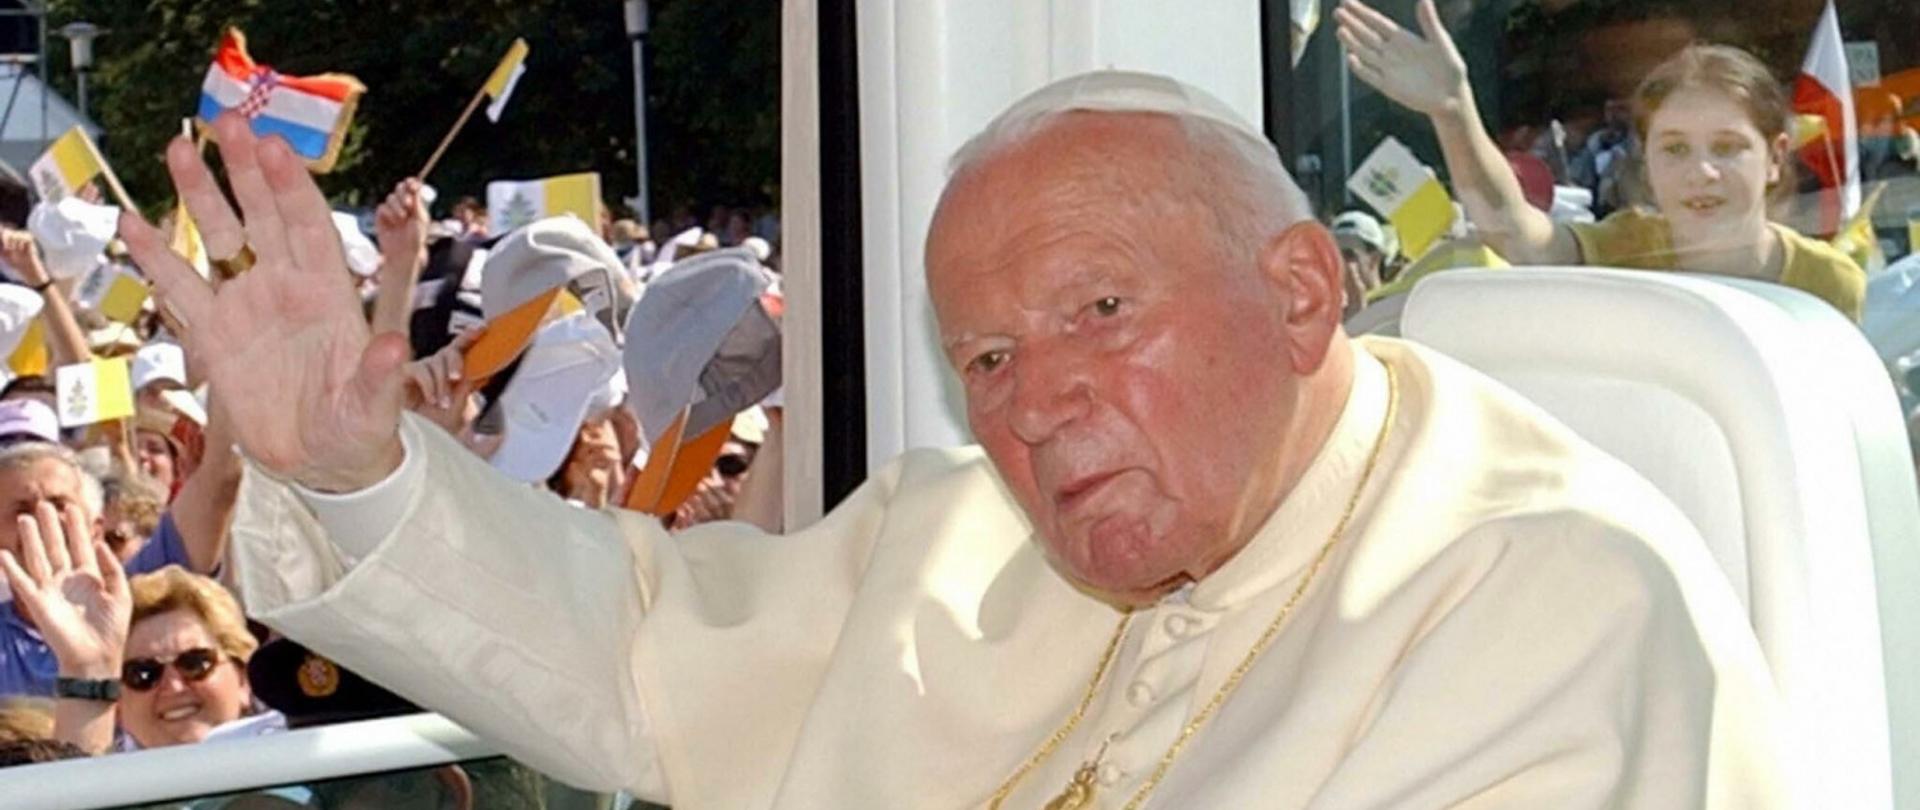 PHOTO: EAST NEWS/AFP
Pope John Paul II waves to faithful and pilgrims as he arrives in his popemobile for a mass celebration in Rijeka, Croatia, 08 June 2003. The Pope, on his 100th overseas trip, will tour Croatia until June 09.